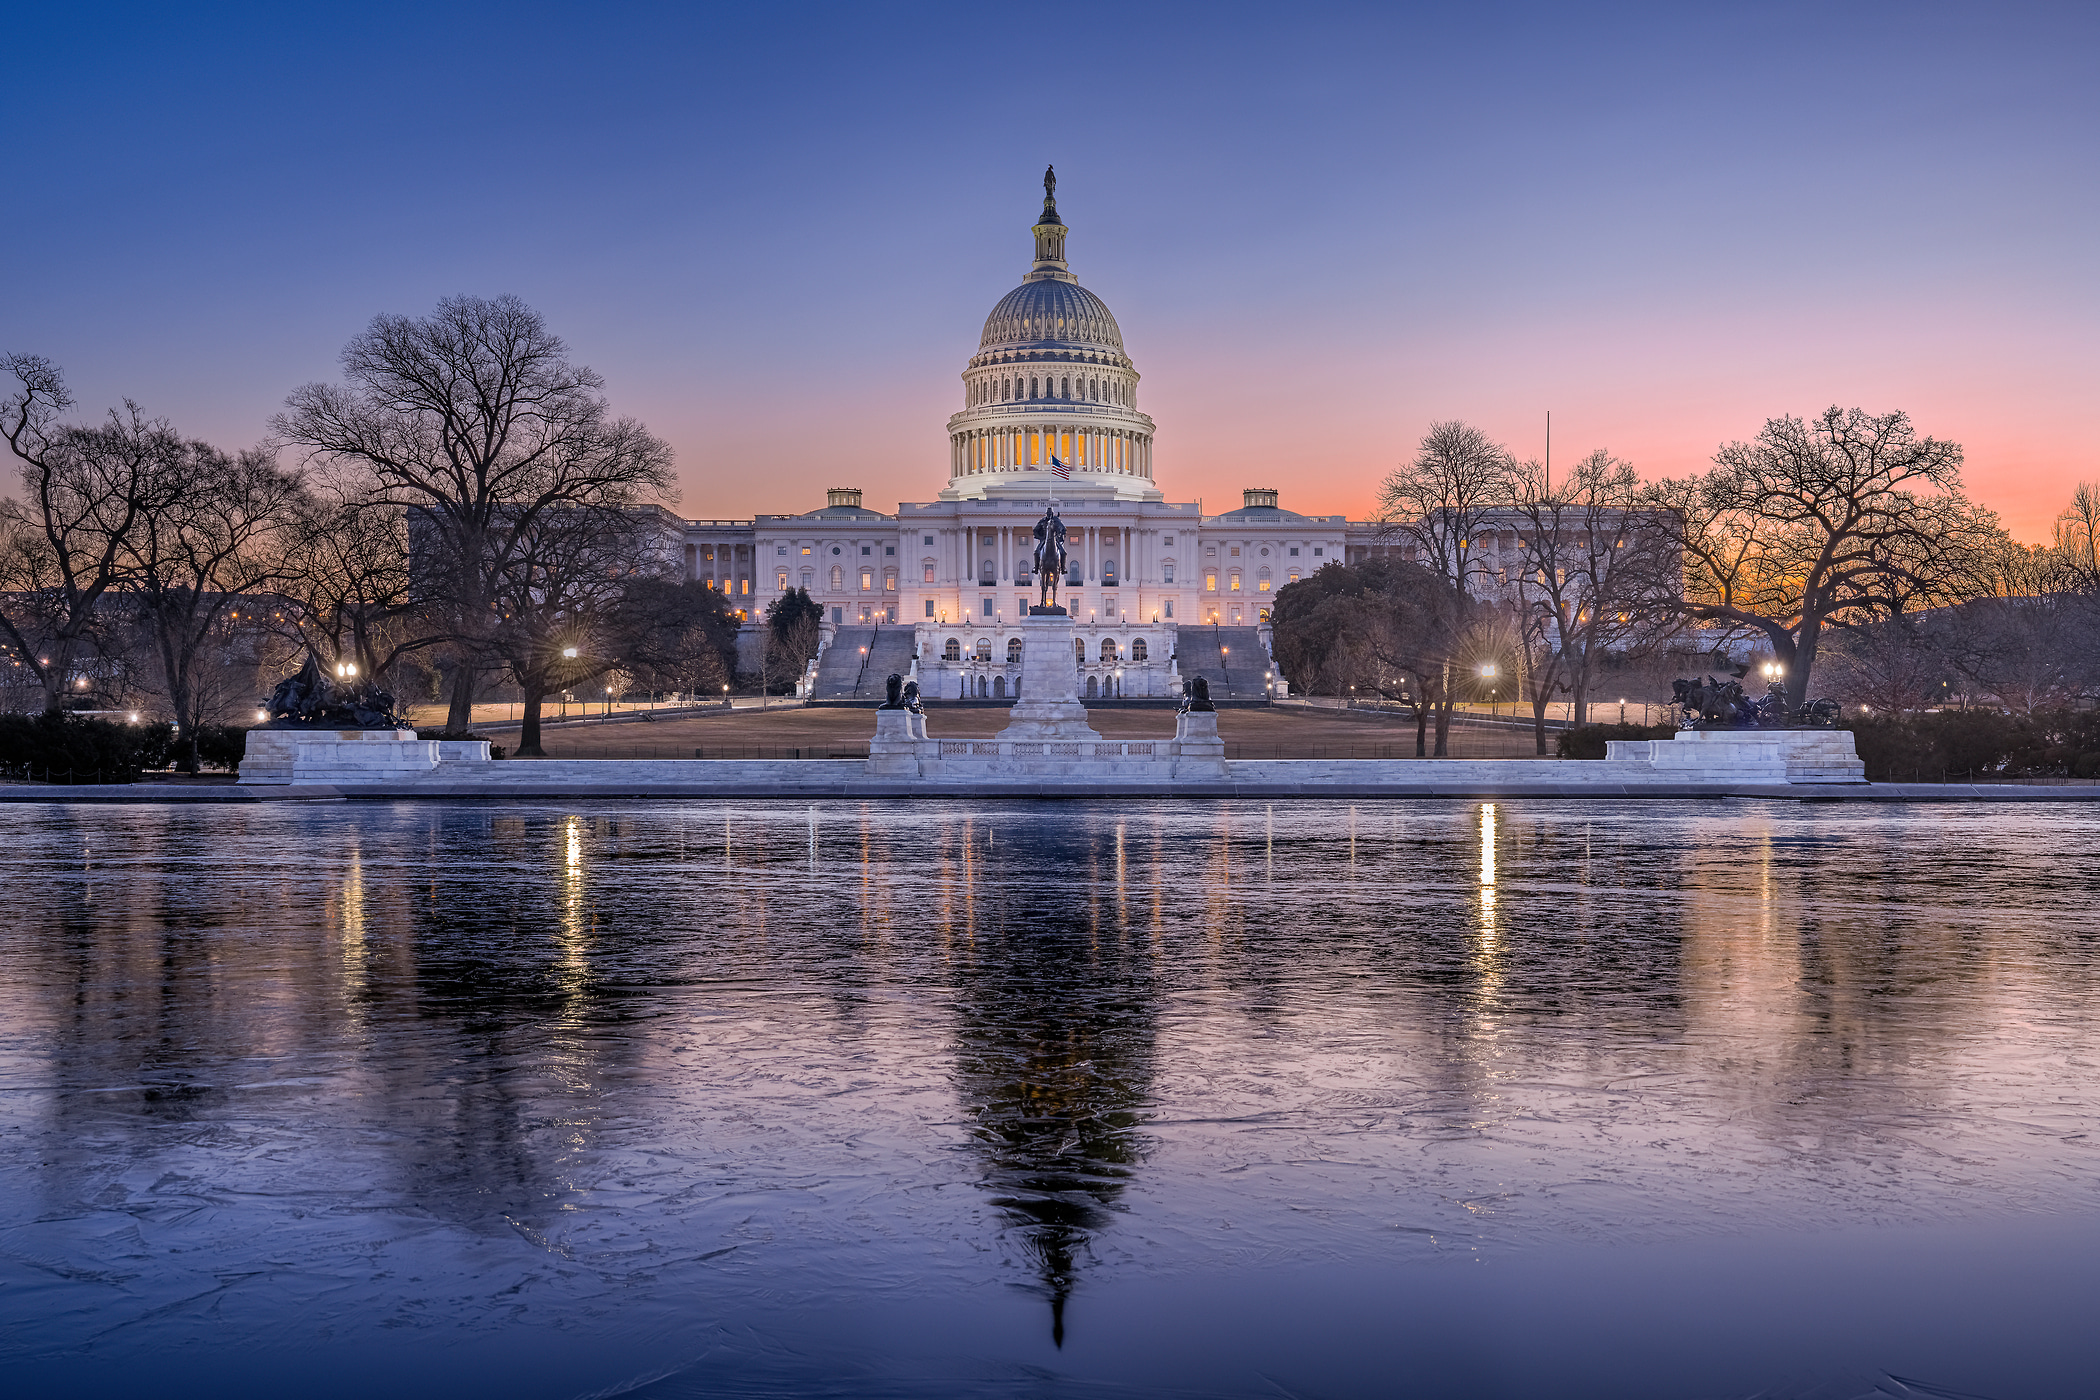 102 megapixels! A very high resolution, large-format VAST photo print of the US Capitol Building at sunrise; photograph created by Tim Lo Monaco in United States Capitol Building, Washington, D.C.